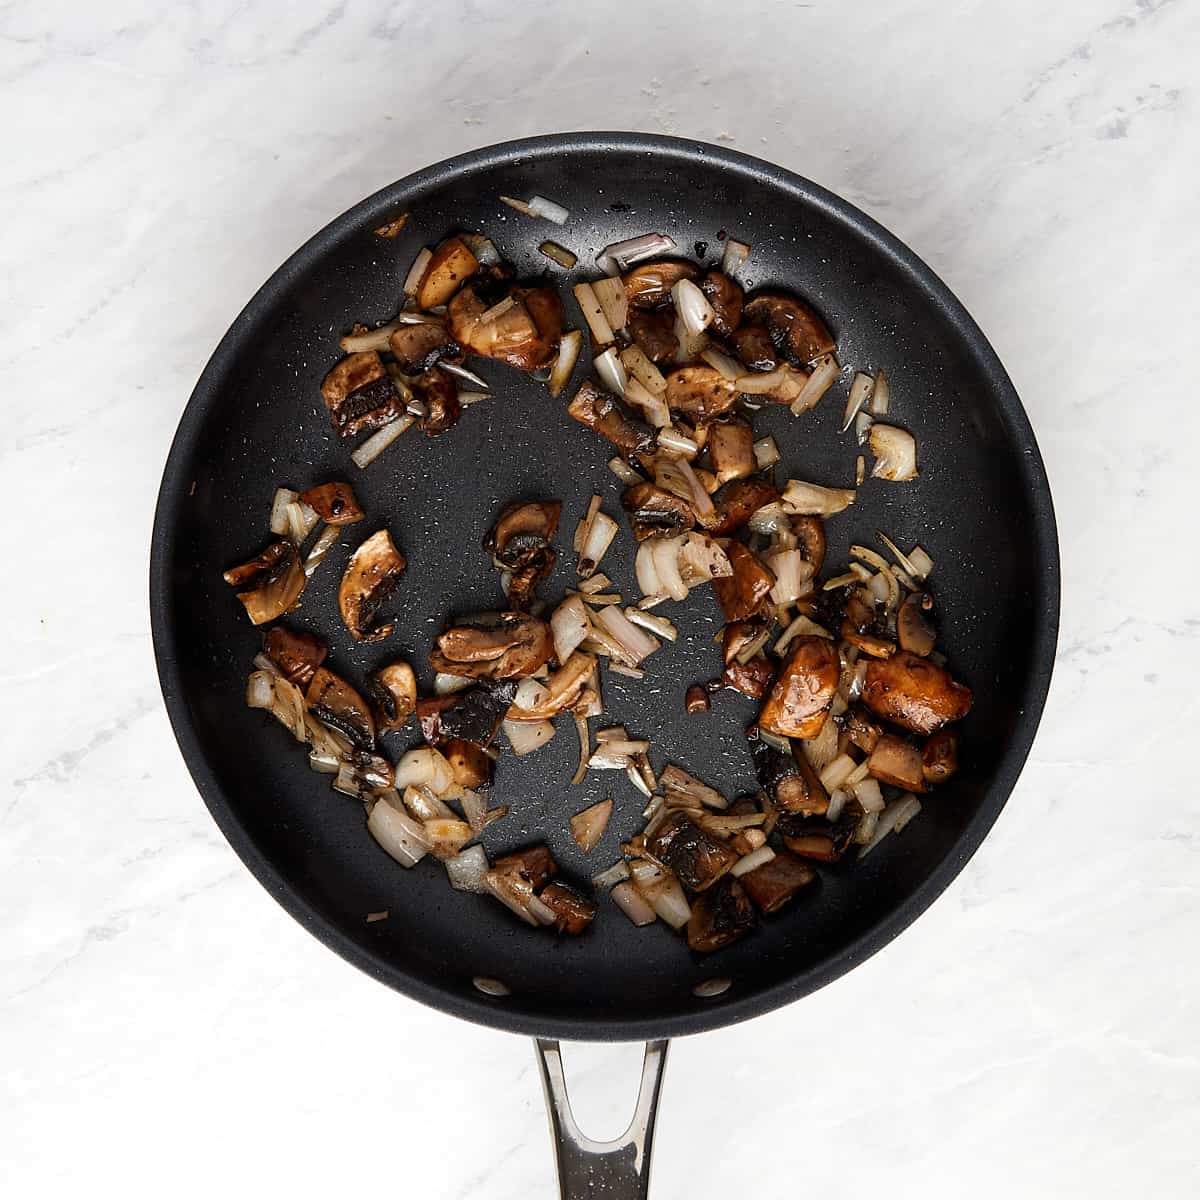 sautéed mushrooms and shallots in a skillet